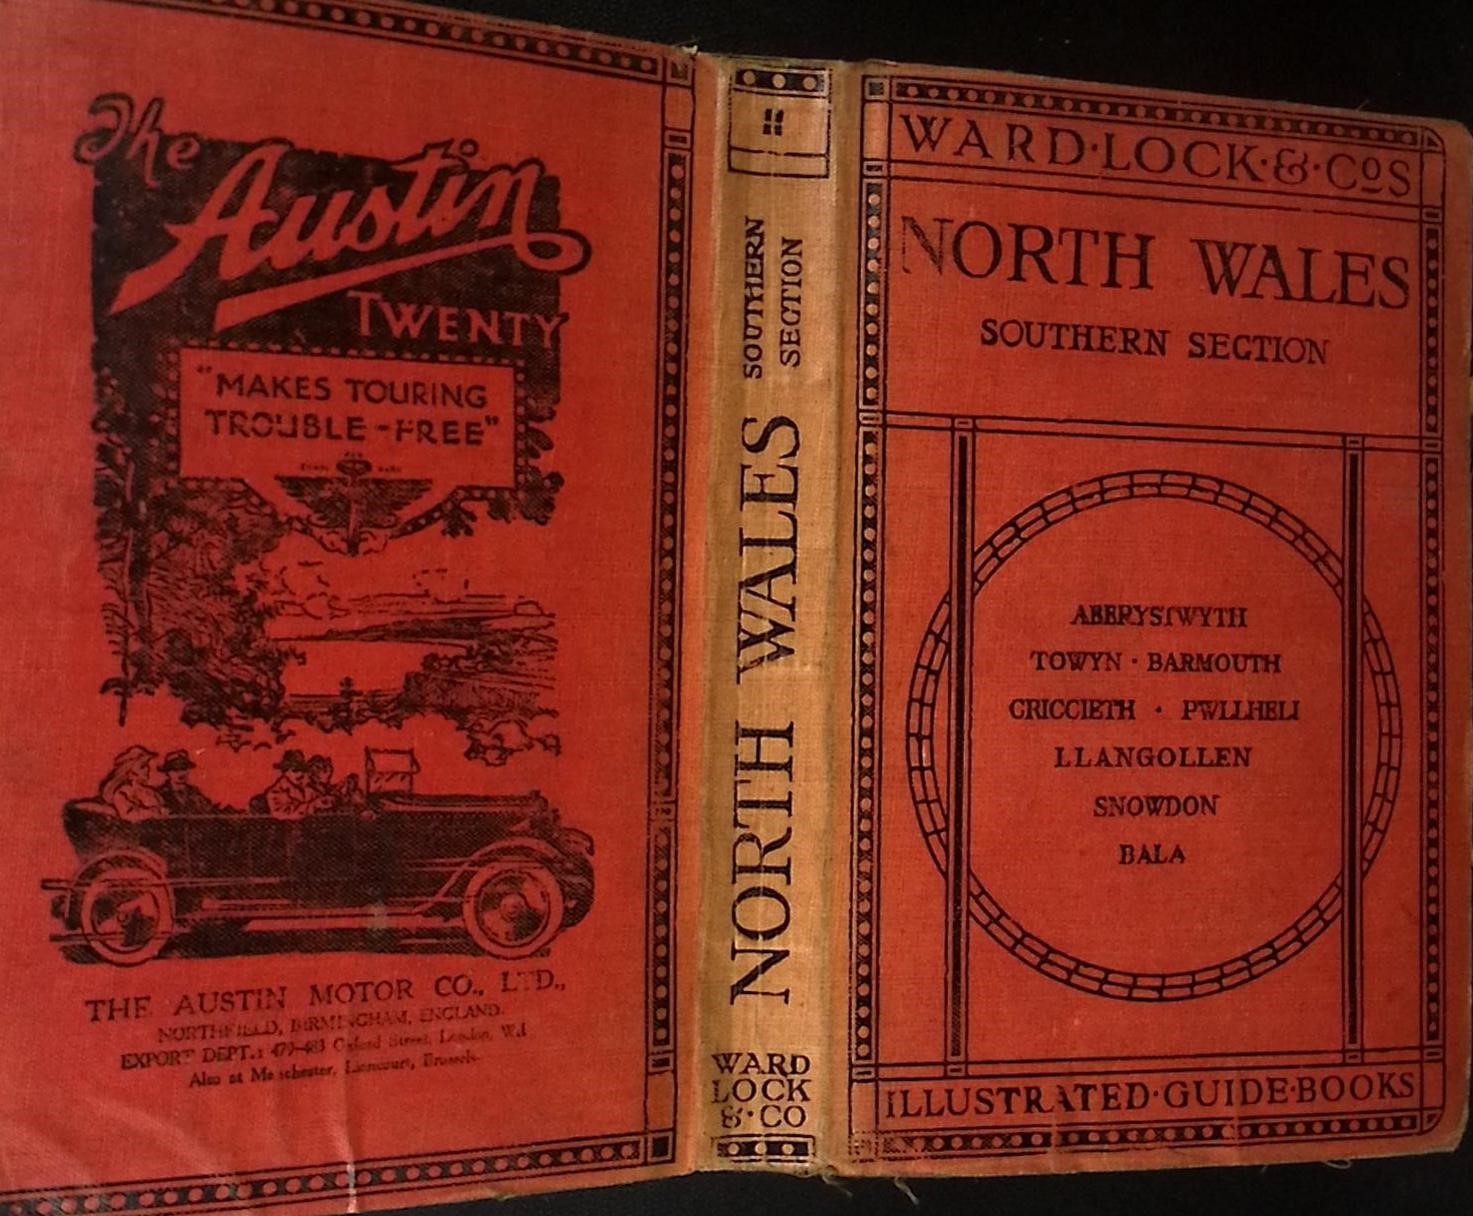 North Wales (Southern Section). A Pictorial and Descriptive Guide. Ward Lock's Original Red Guide. 5th edition. 1920.